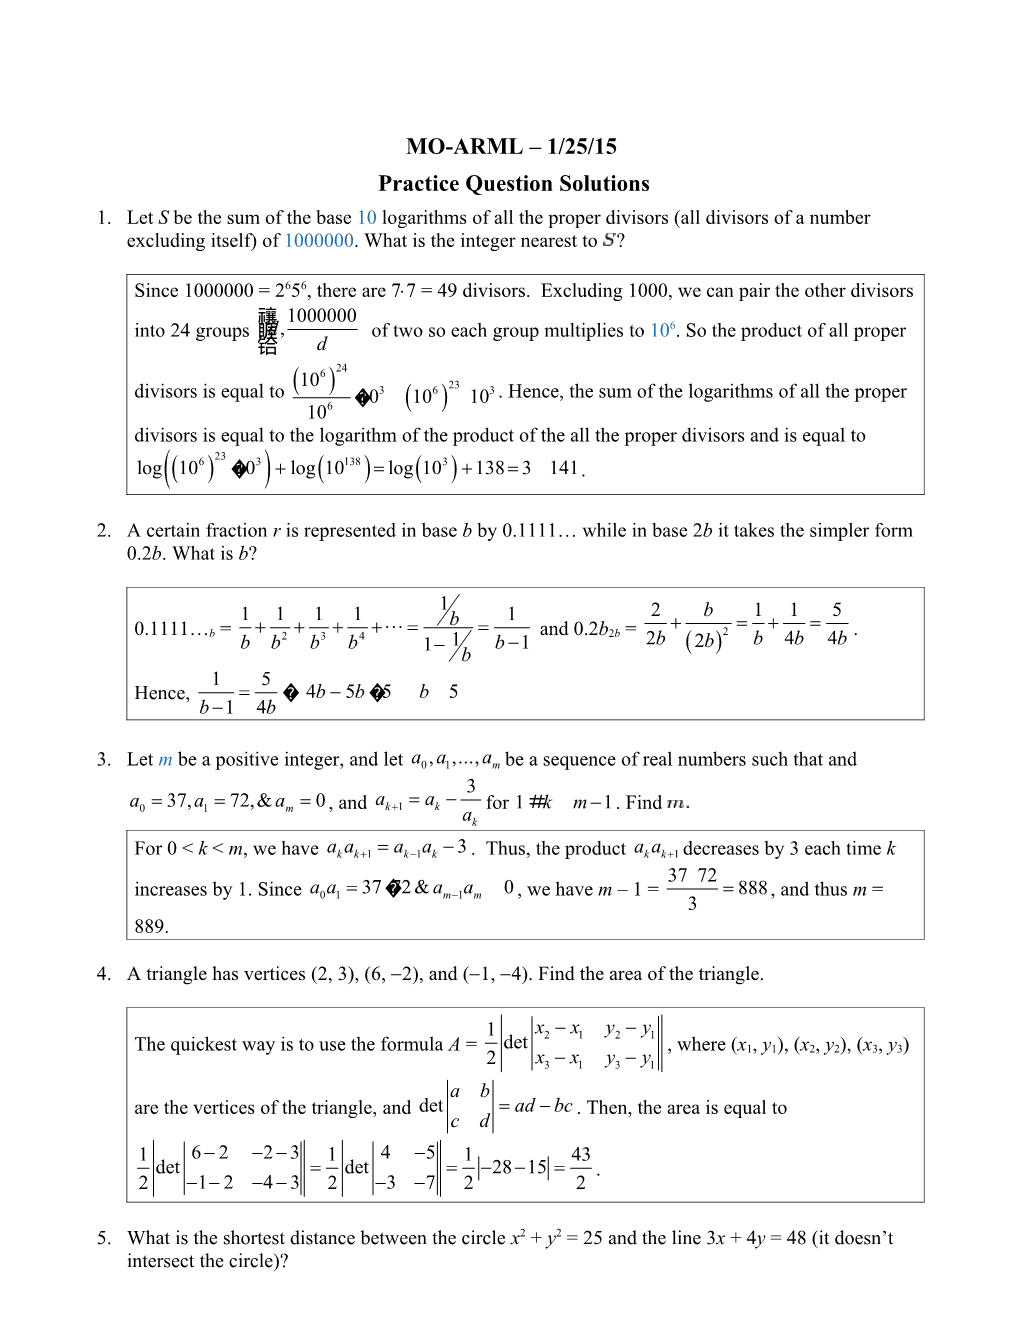 Practice Question Solutions